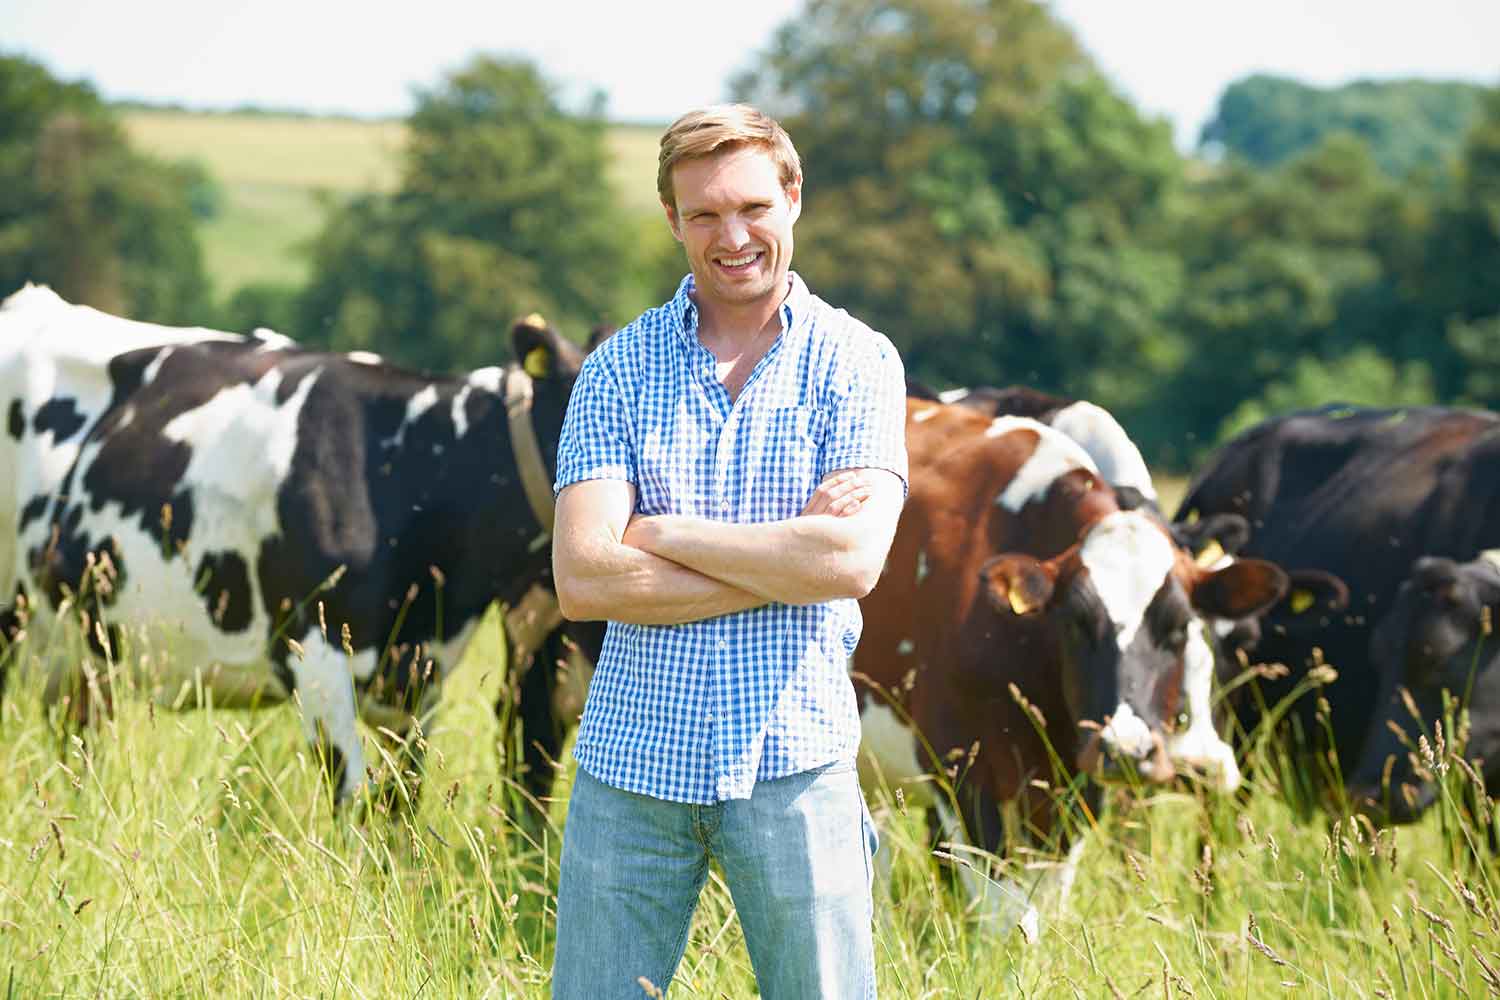 man in blue shirt and jeans standing in front of cows in pasture